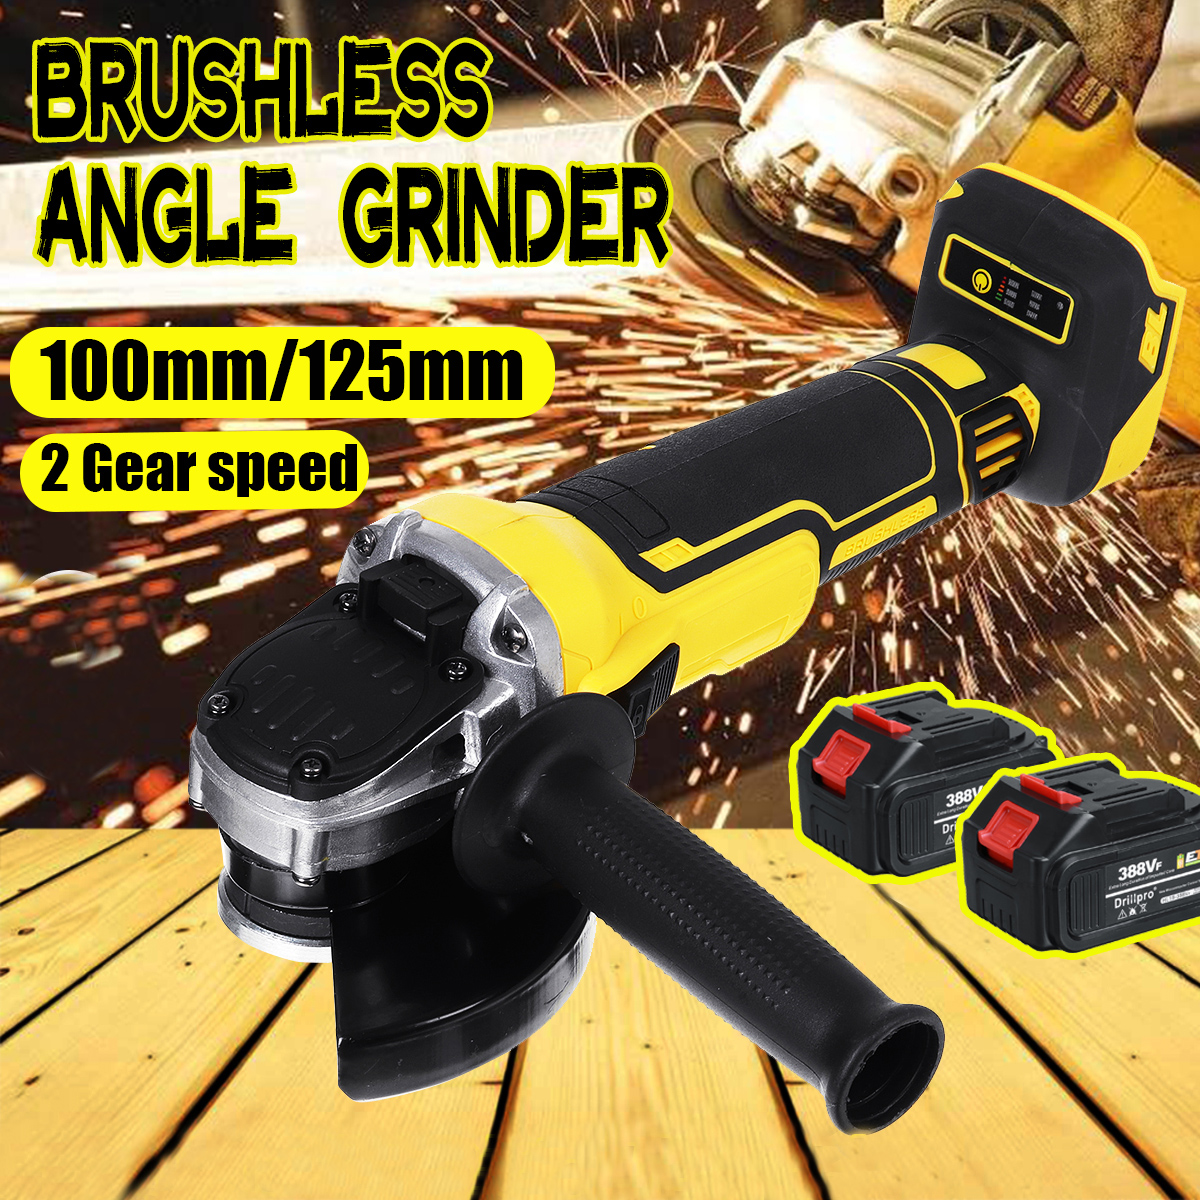 Drillpro-388VF-100mm125mm-Brushless-Angle-Grinder-Wireless-Rechargeable-Wood-Metal-Cutting-Polishing-1874664-1